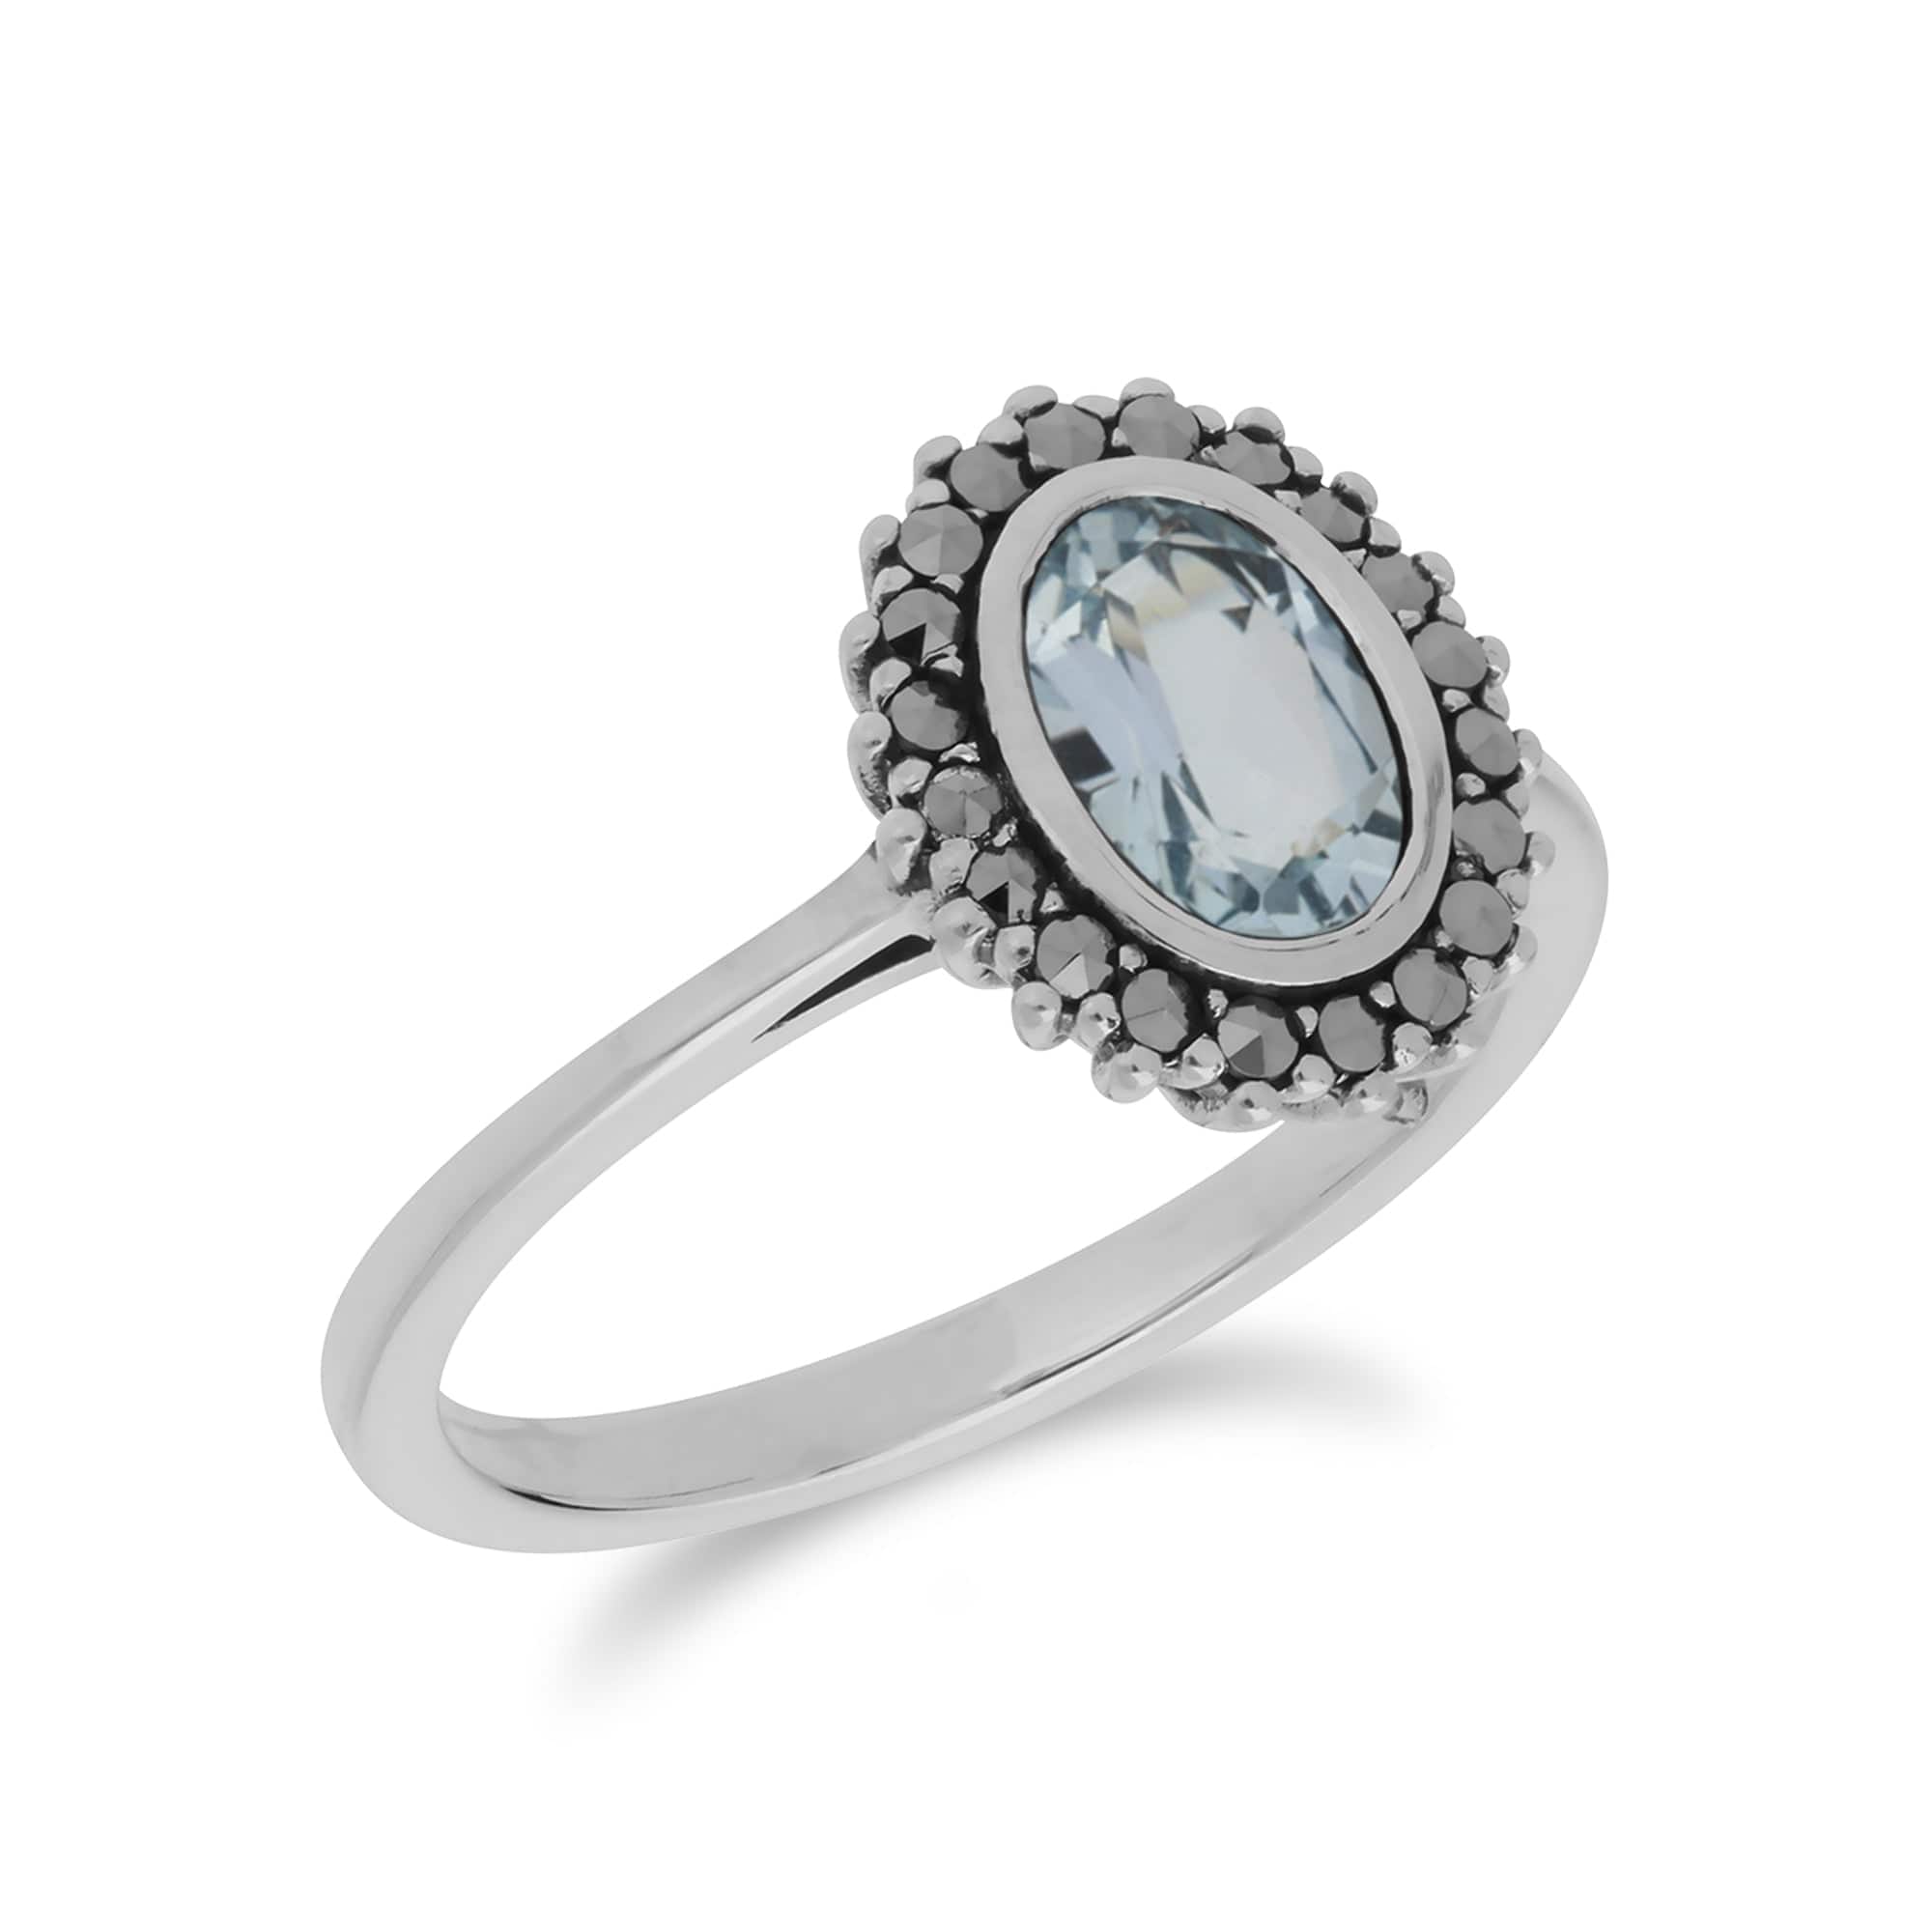 214R599701925 Art Deco Style Oval Blue Topaz & Marcasite Halo Ring in 925 Sterling Silver 2